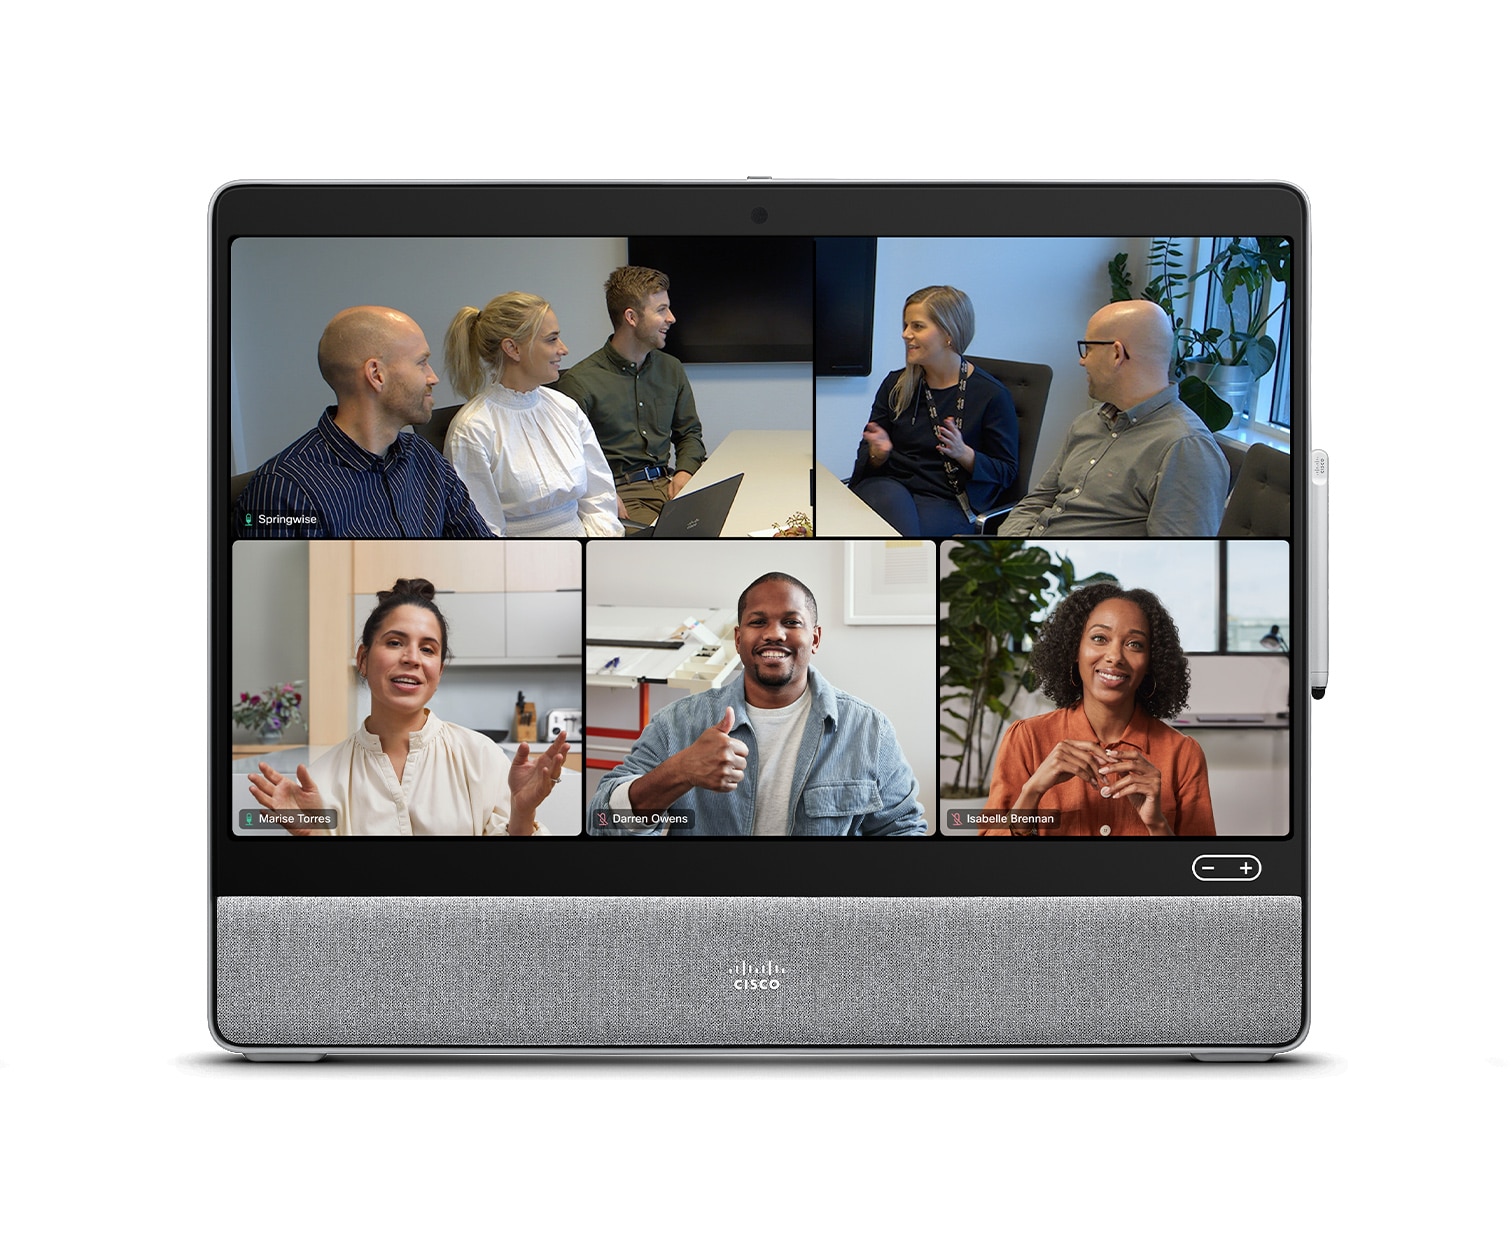 Frames and People Focus view on Cisco Desk device with Webex meetings platform and 5 people selected for video conference.